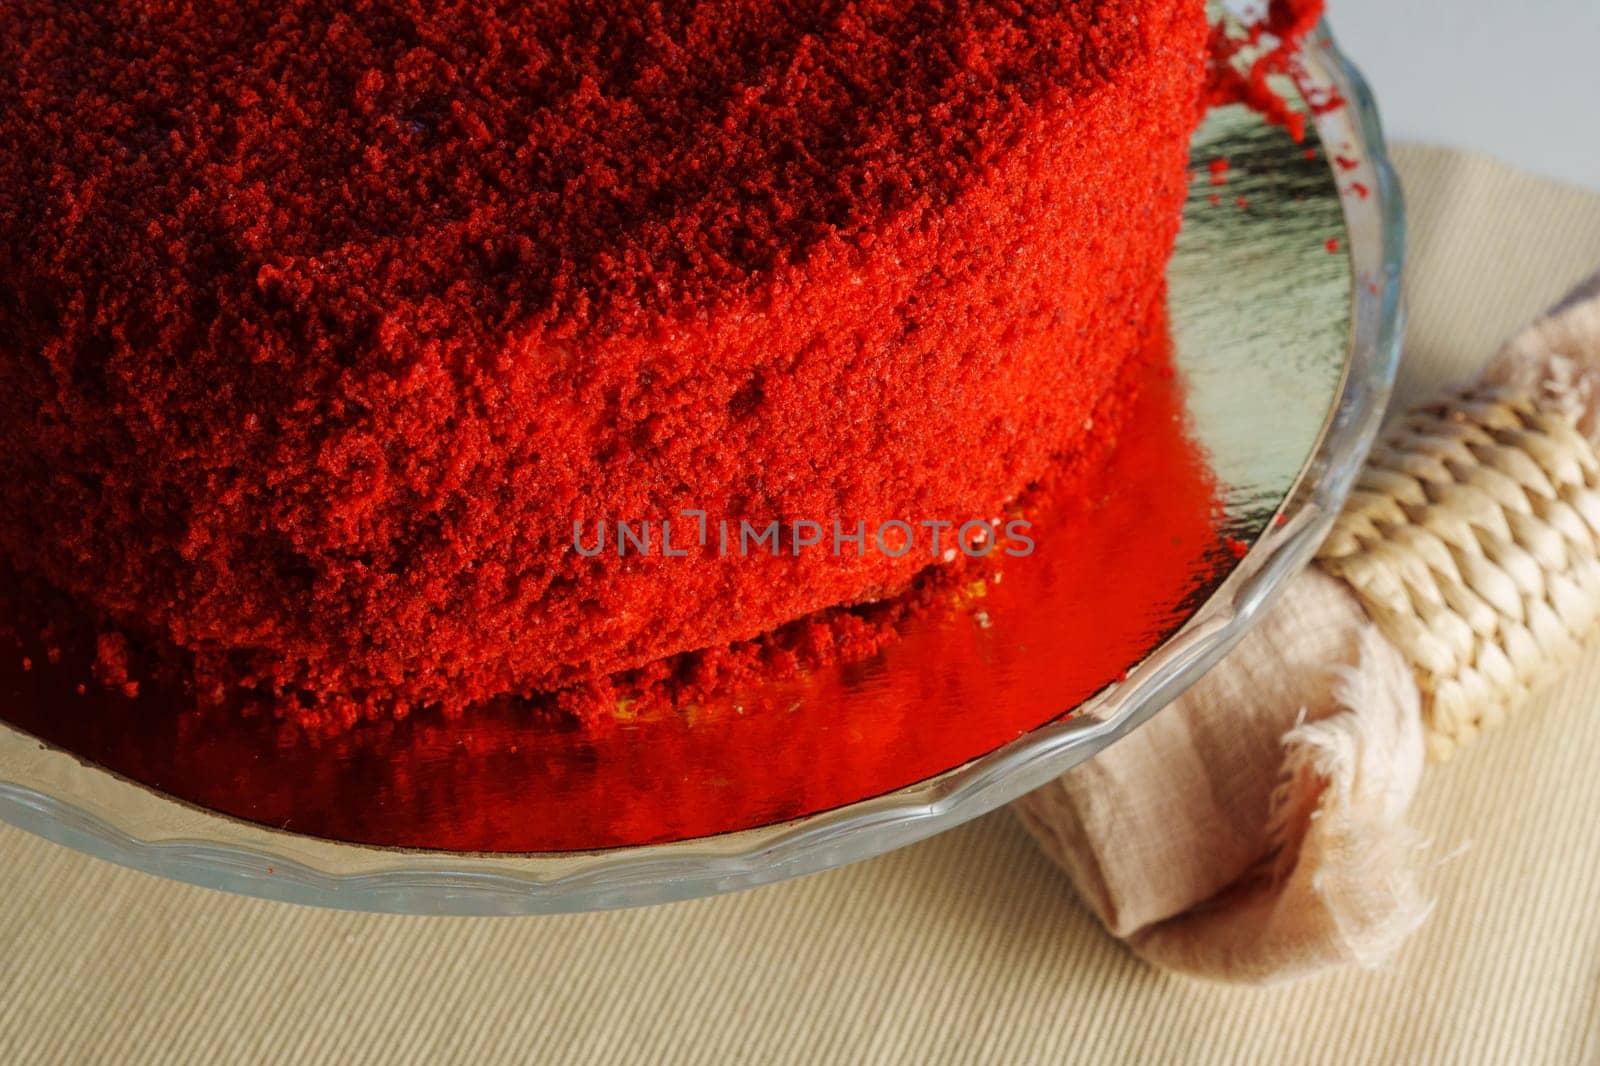 Red velvet cake takes center stage, served on a transparent glass dish by darksoul72